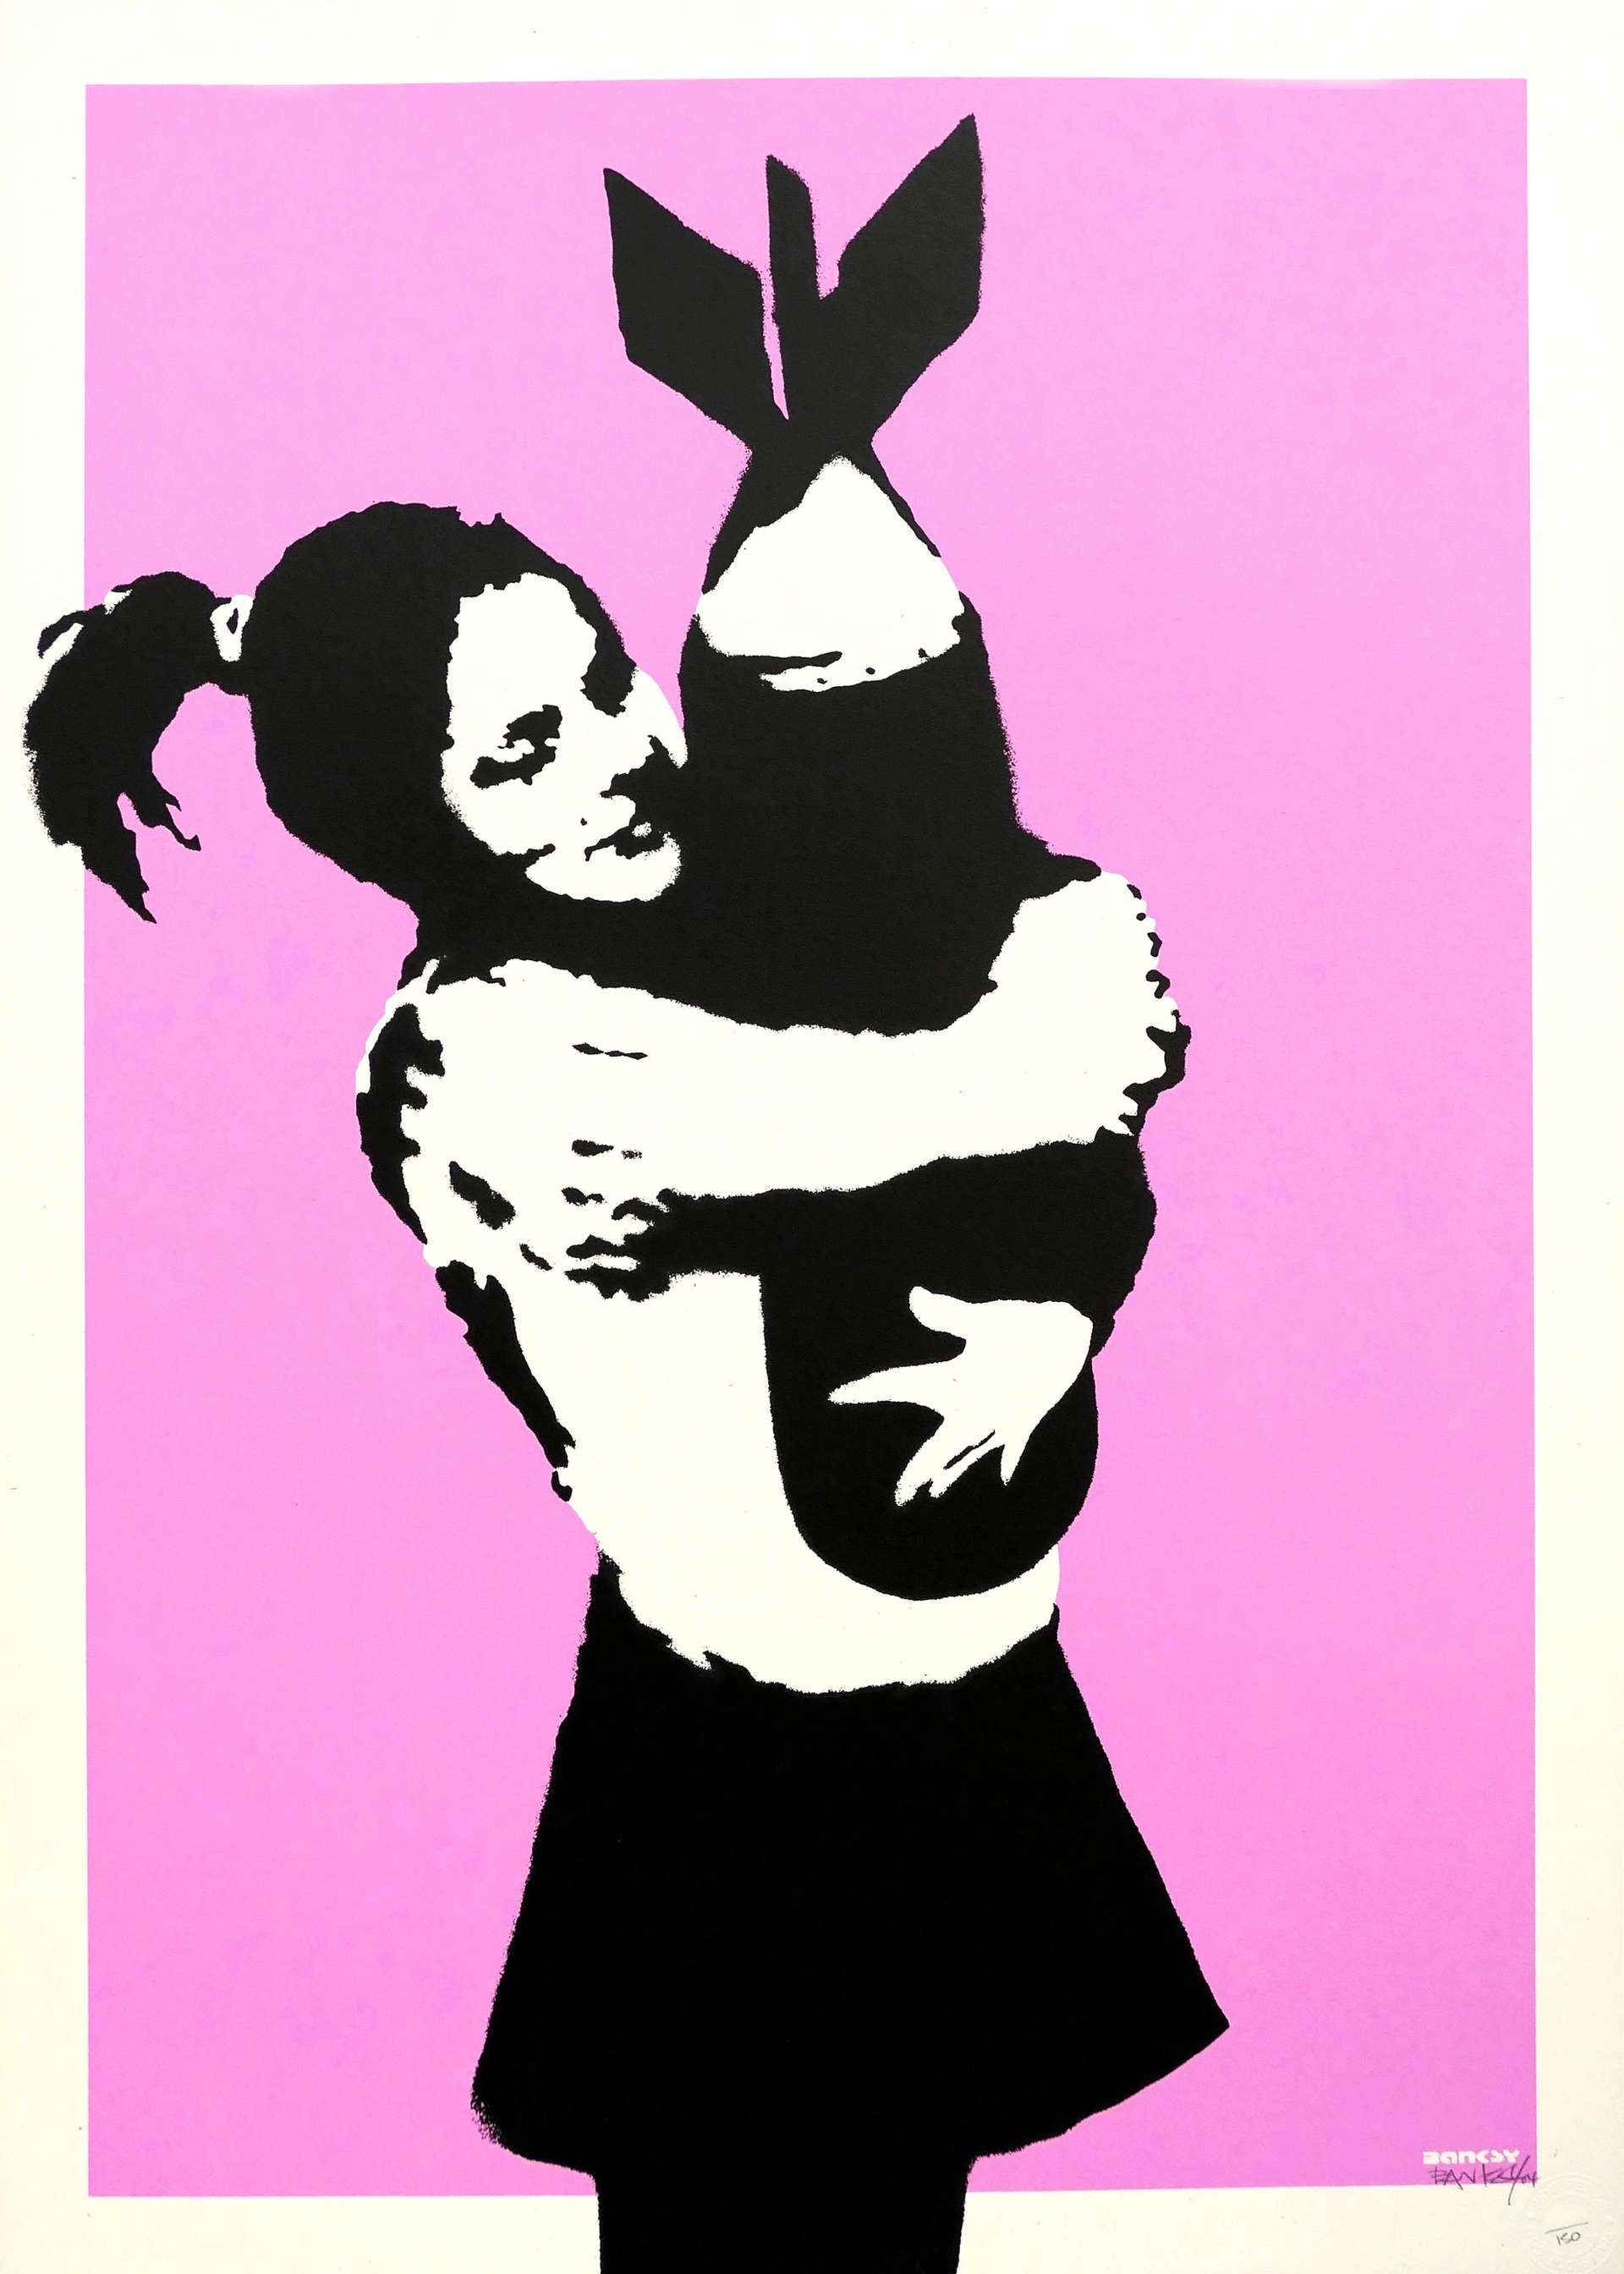 Spray painted image of a young girl hugging a bomb on a bright pink background